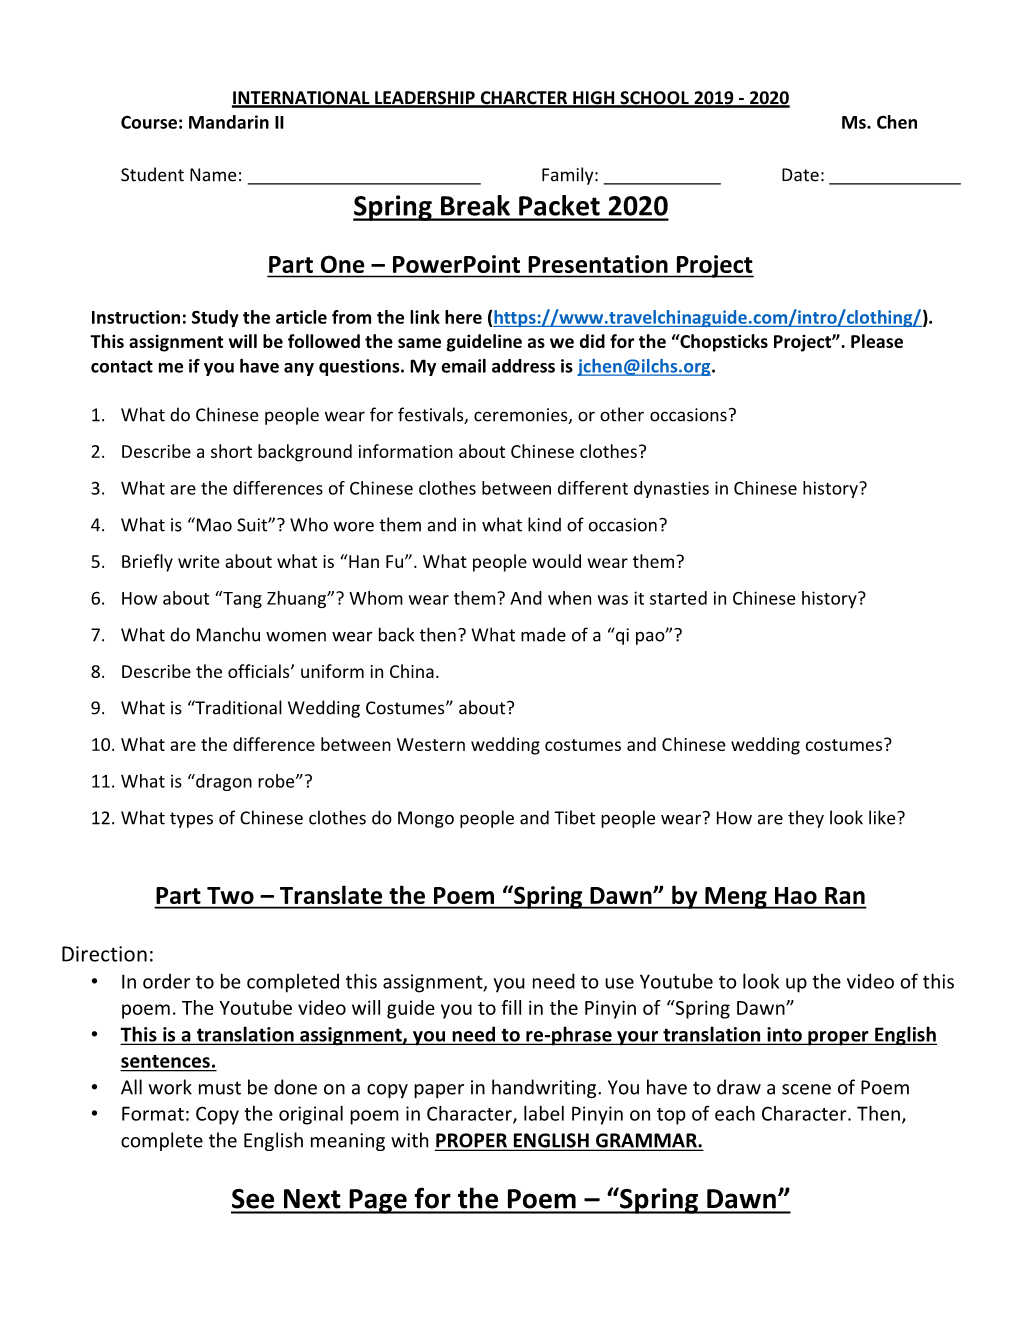 Spring Break Packet 2020 See Next Page for the Poem – “Spring Dawn”